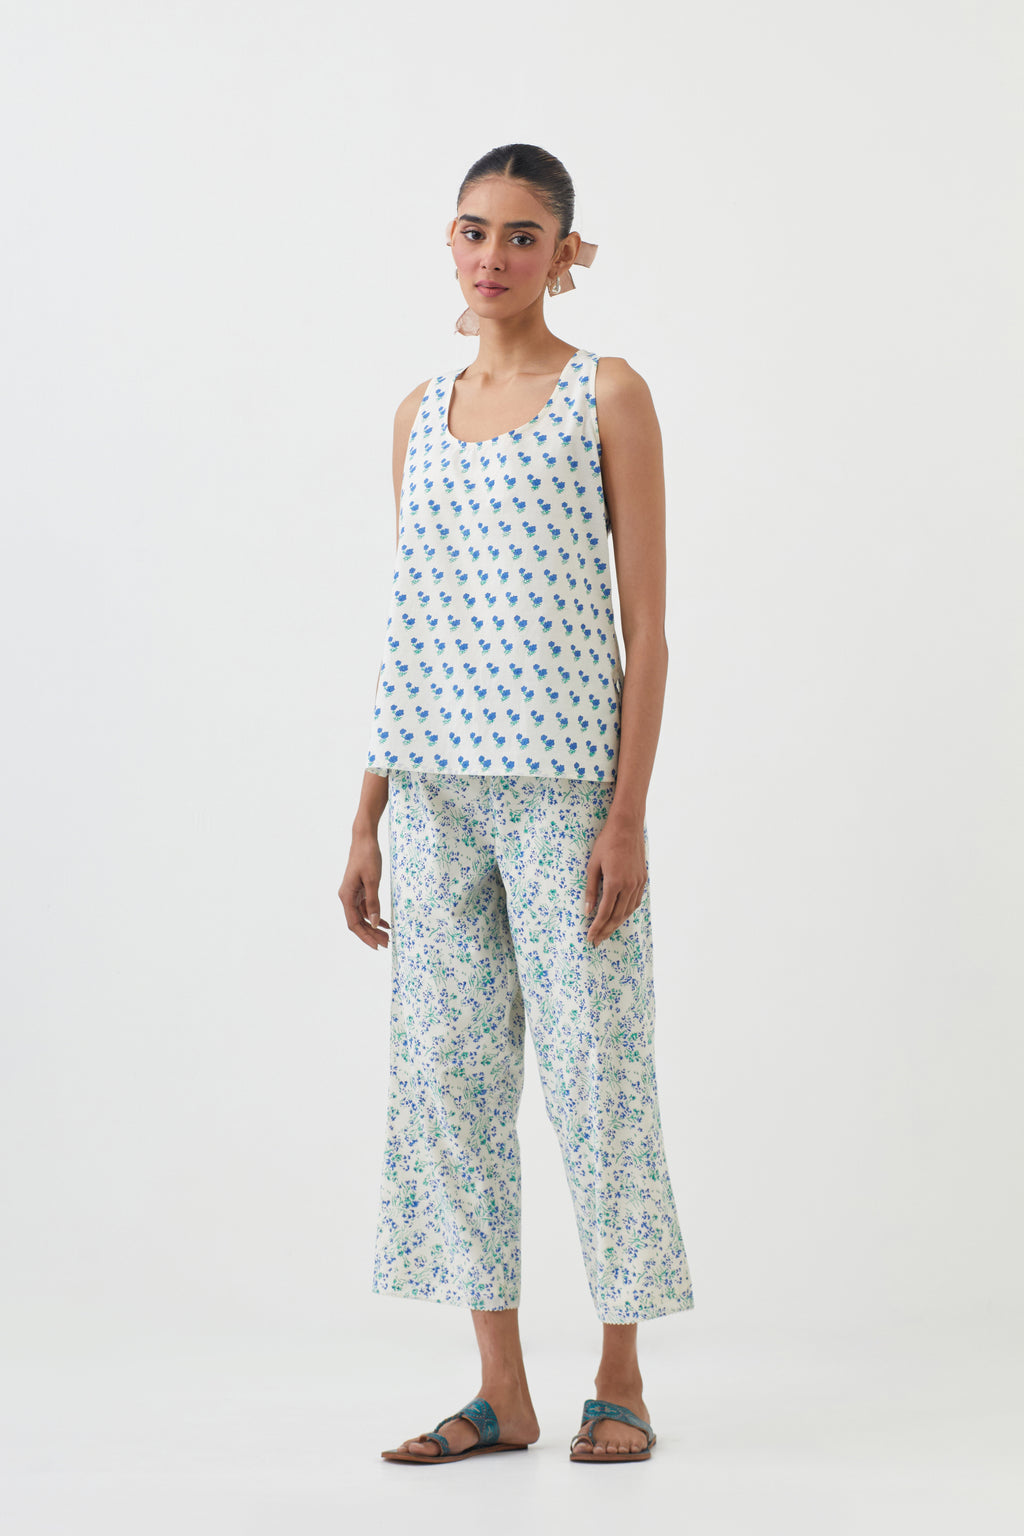 Blue hand block printed short top with hand block printed cotton slip inside, paired with off white hand block printed Cotton ankle length straight pants with all-over blue colored flower.